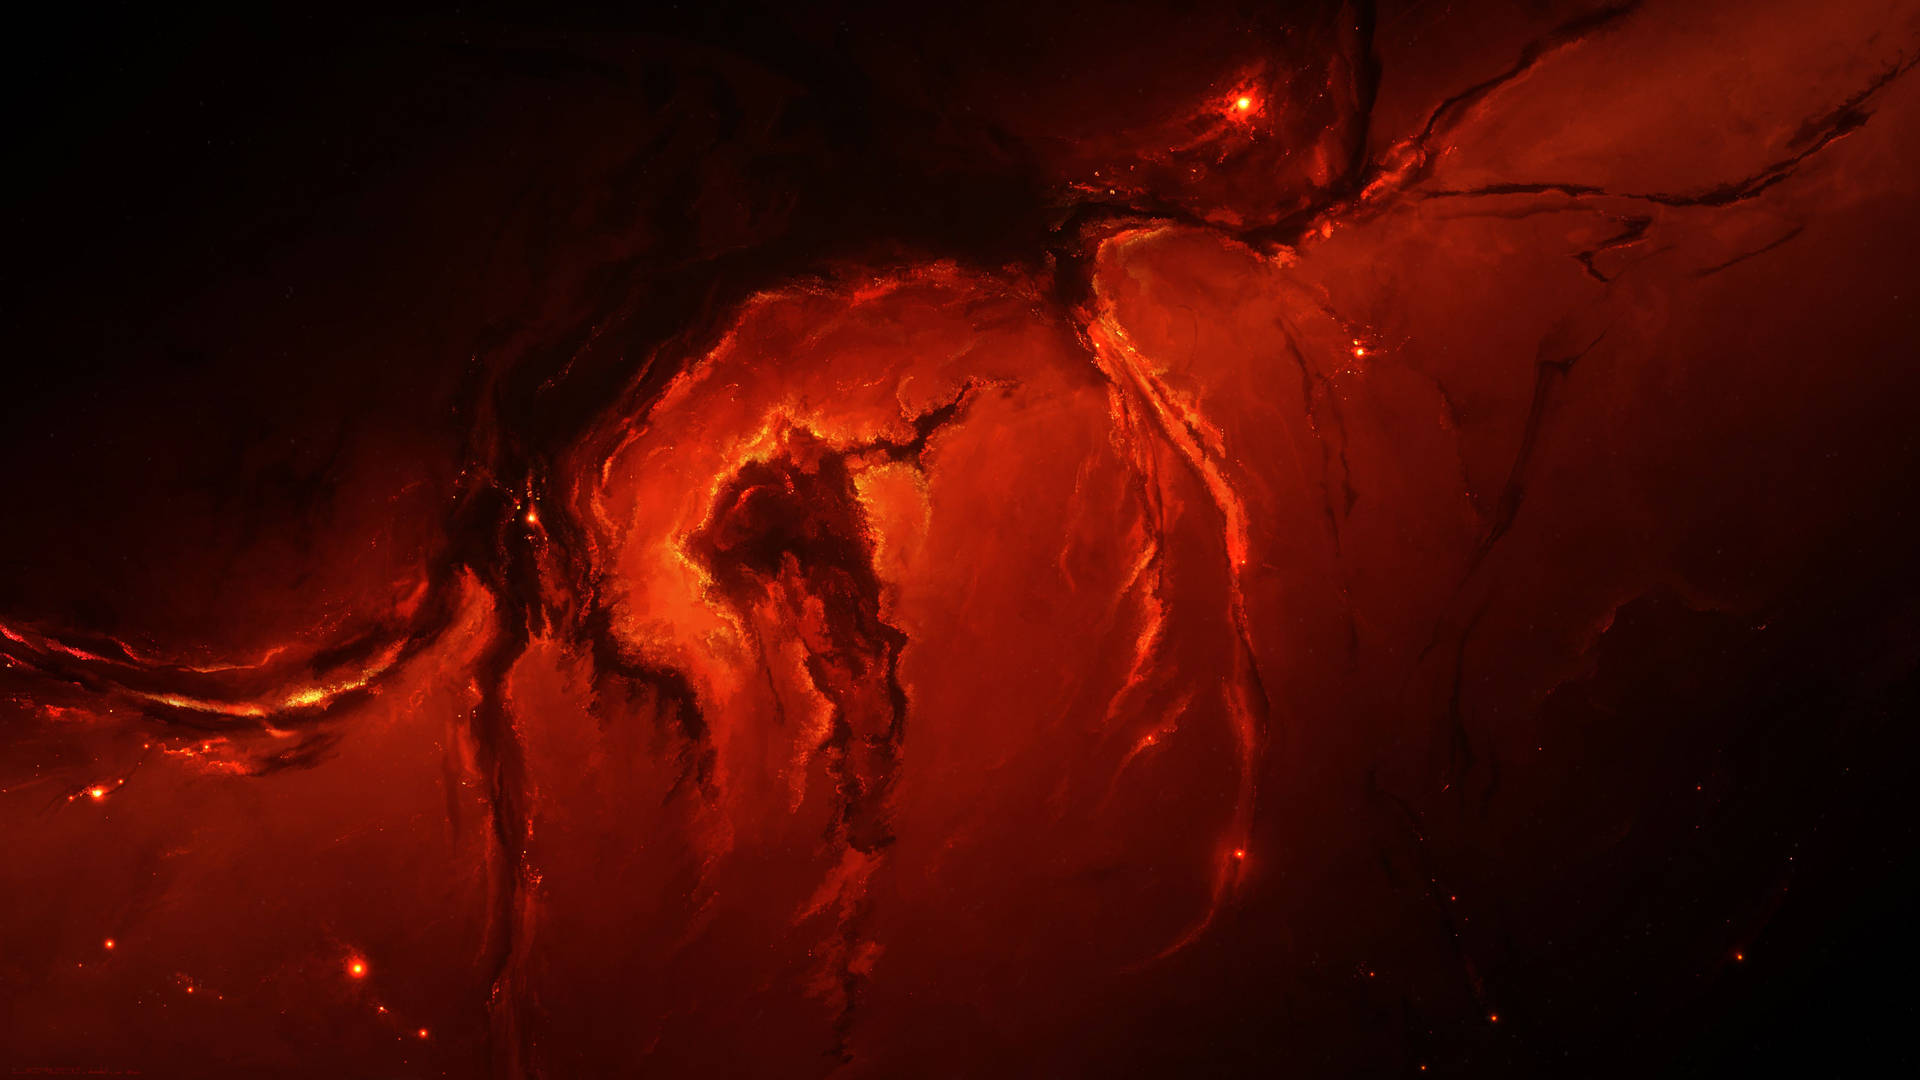 Fire burns brightly in a vast expanse of space Wallpaper